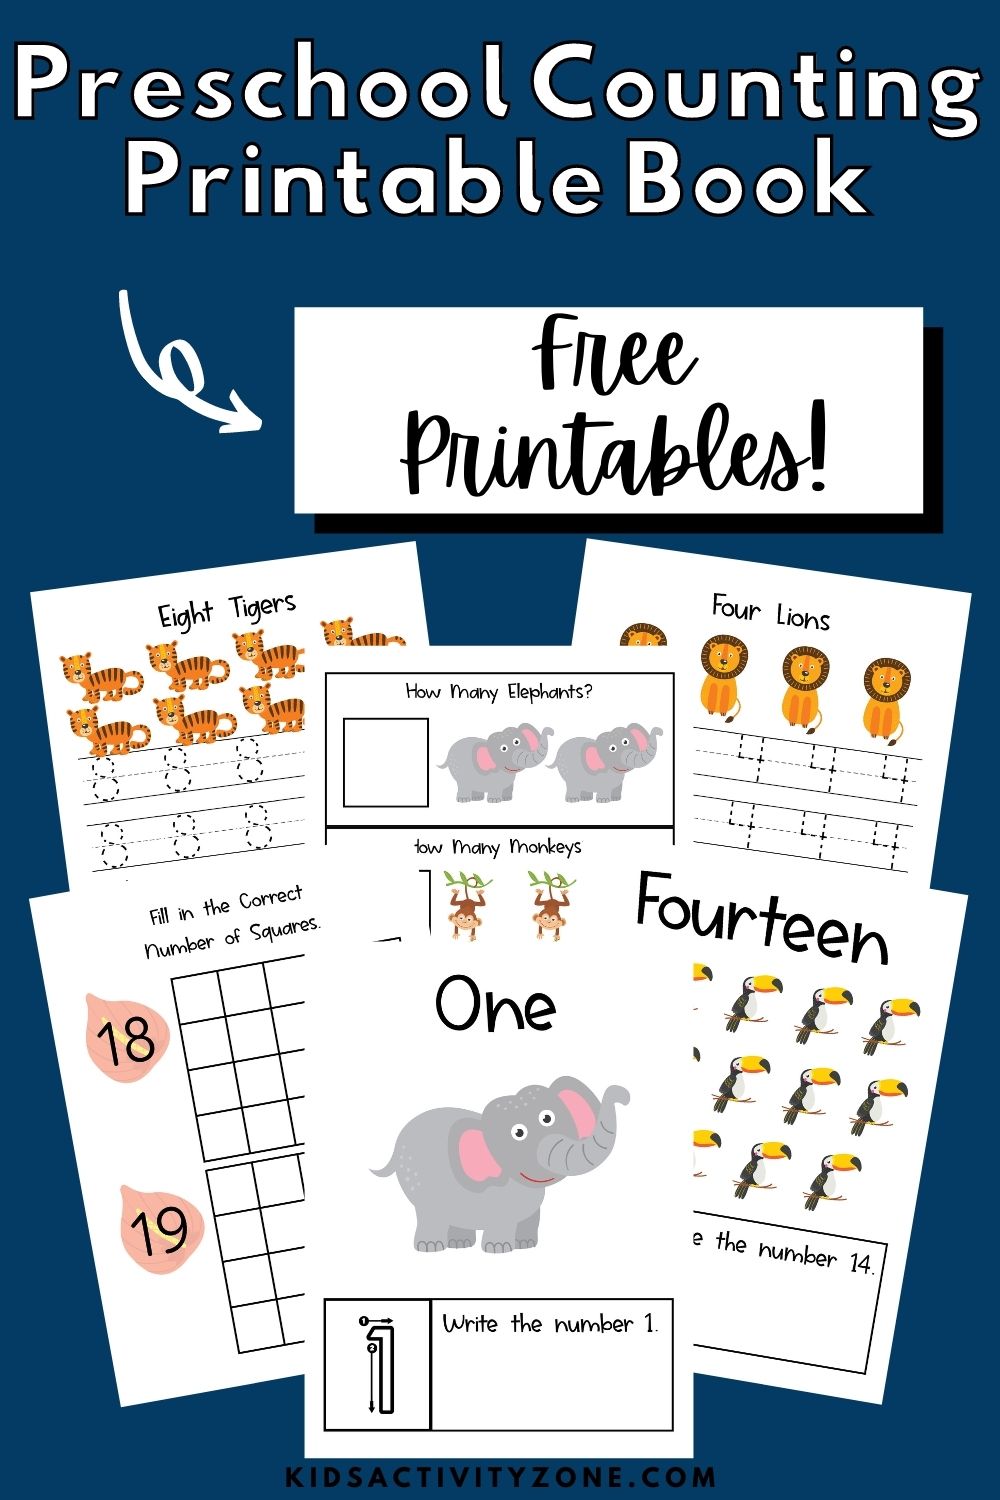 An engaging and fun Preschool Theme Unit all about Jungle Friends! This Jungle Theme Preschool Unit has a printable counting book along with activities each day to read, make, experience and work! Your preschool will love these fun hands on activities.